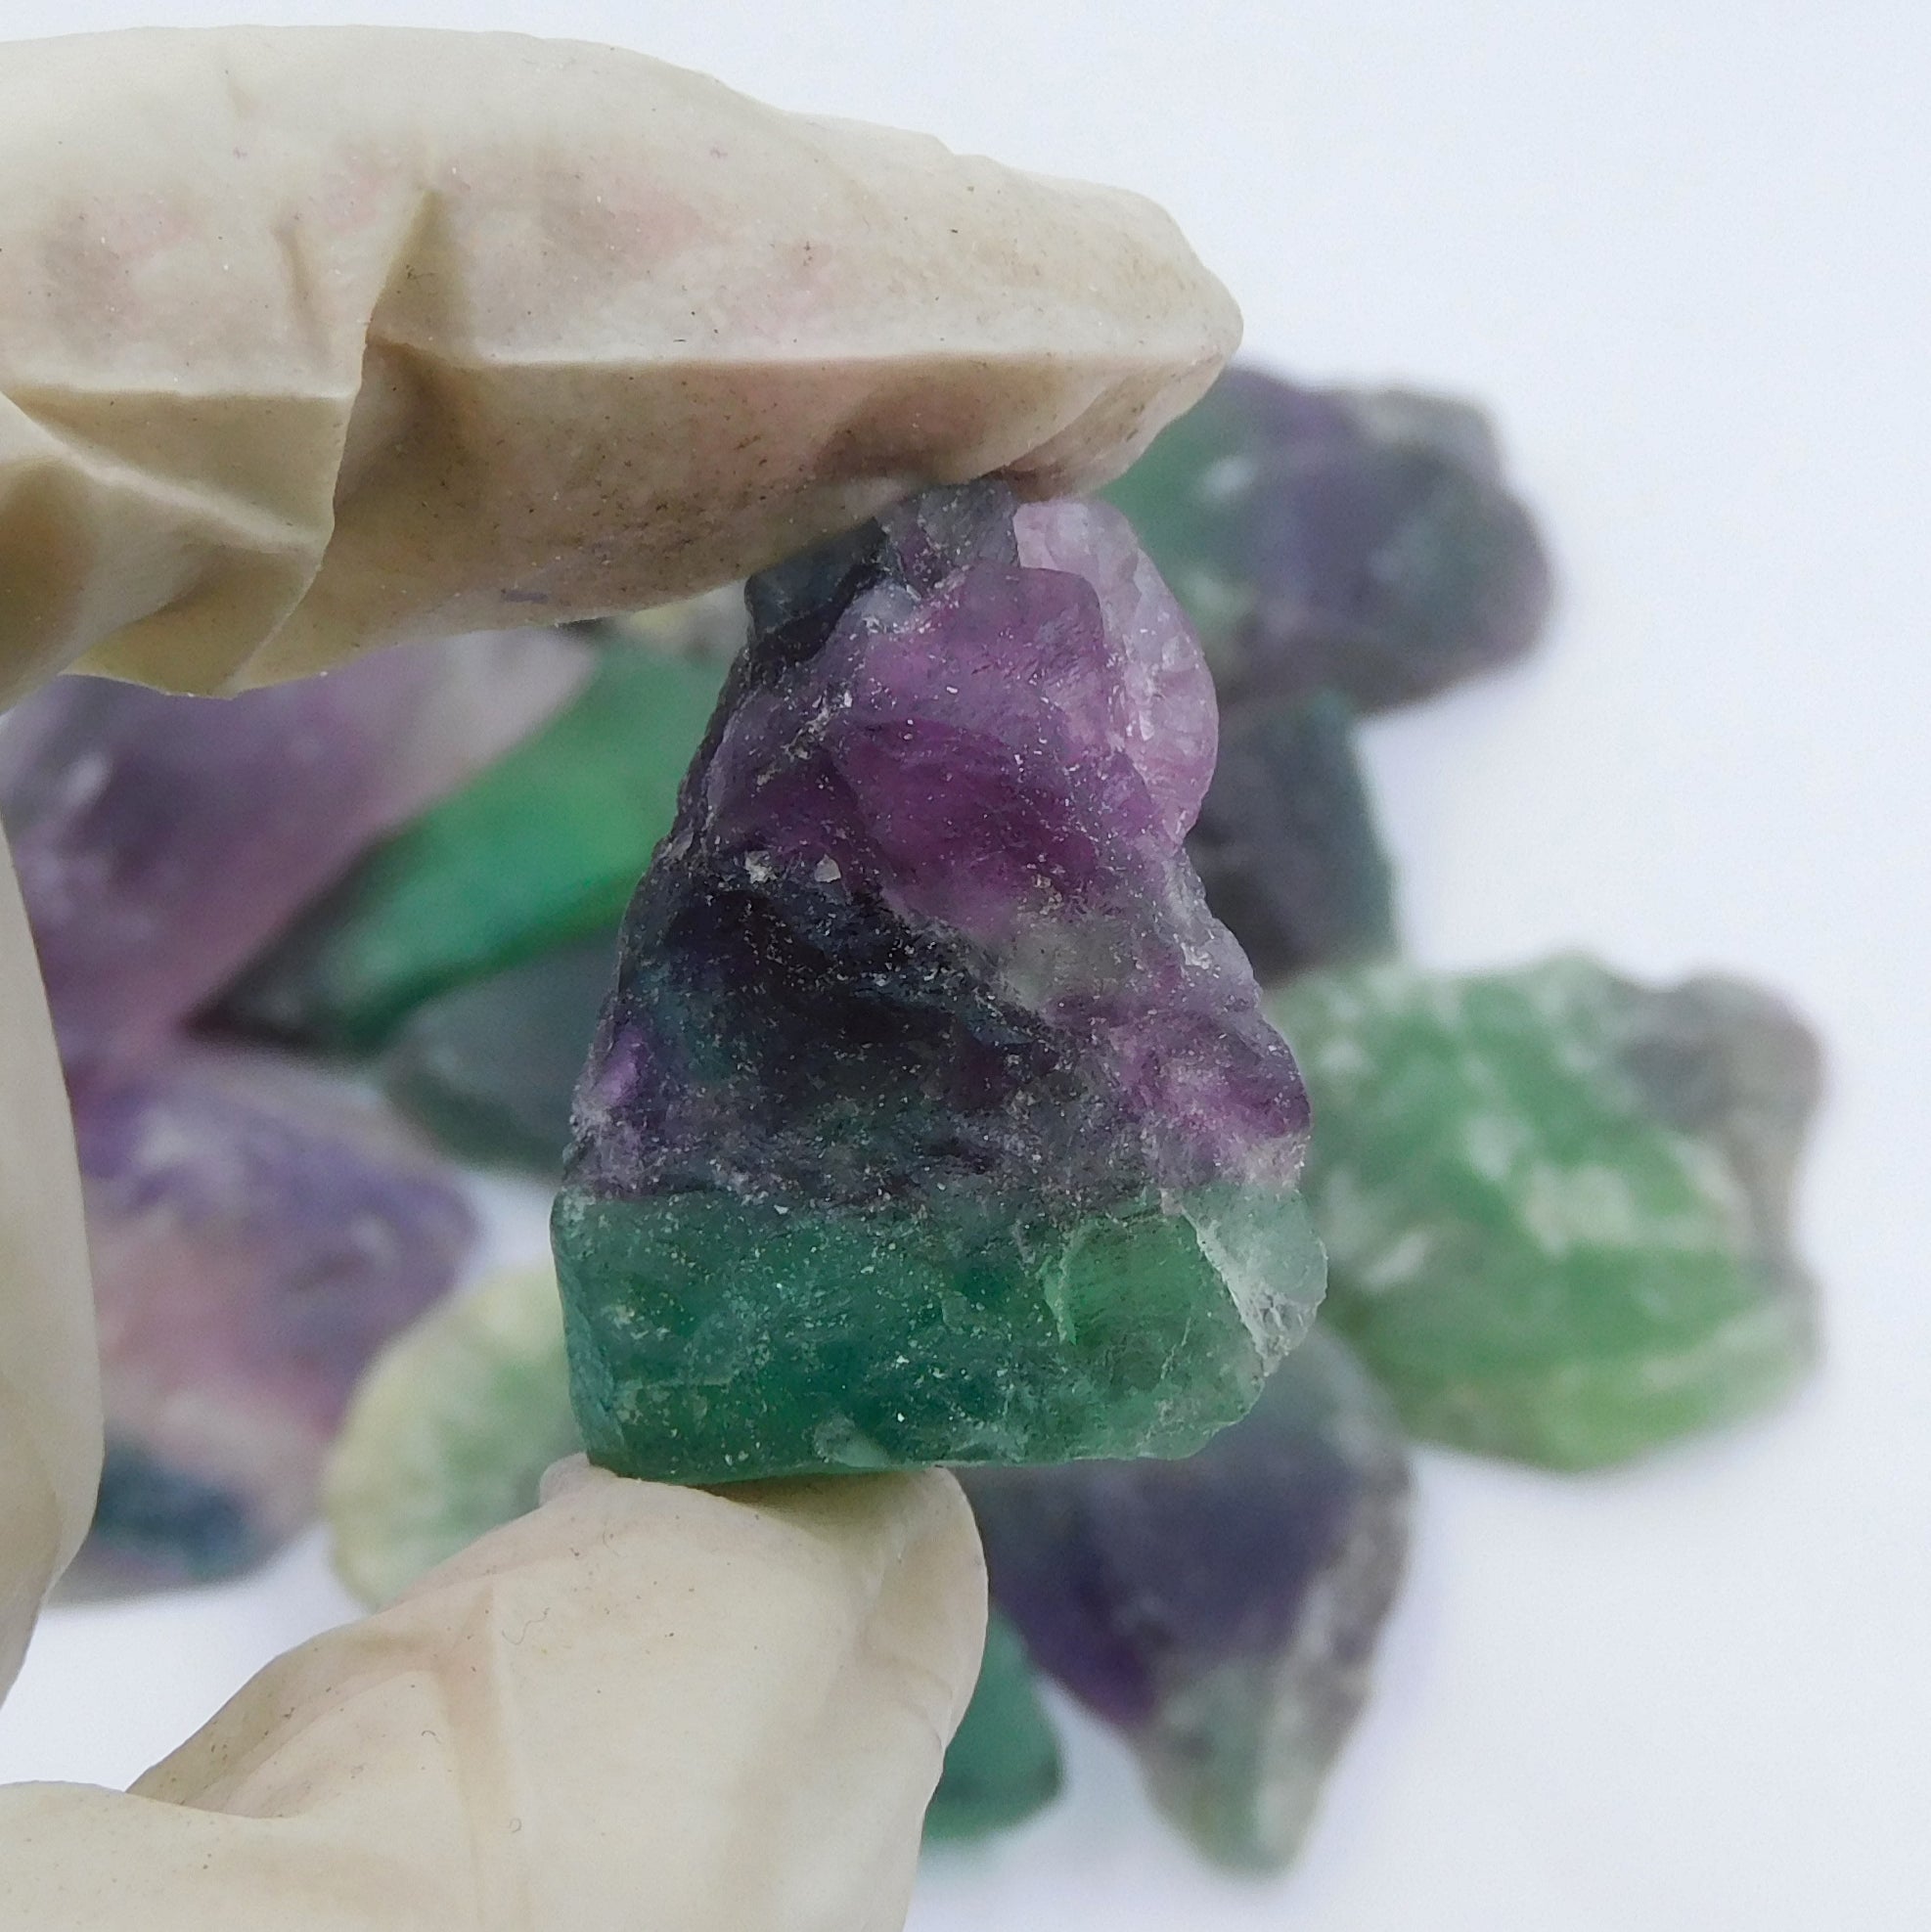 CERTIFIED 568.52 Ct Earth Mined Natural Fluorite Uncut Rough Multi Color Loose Gemstone - Free Delivery Free Gift